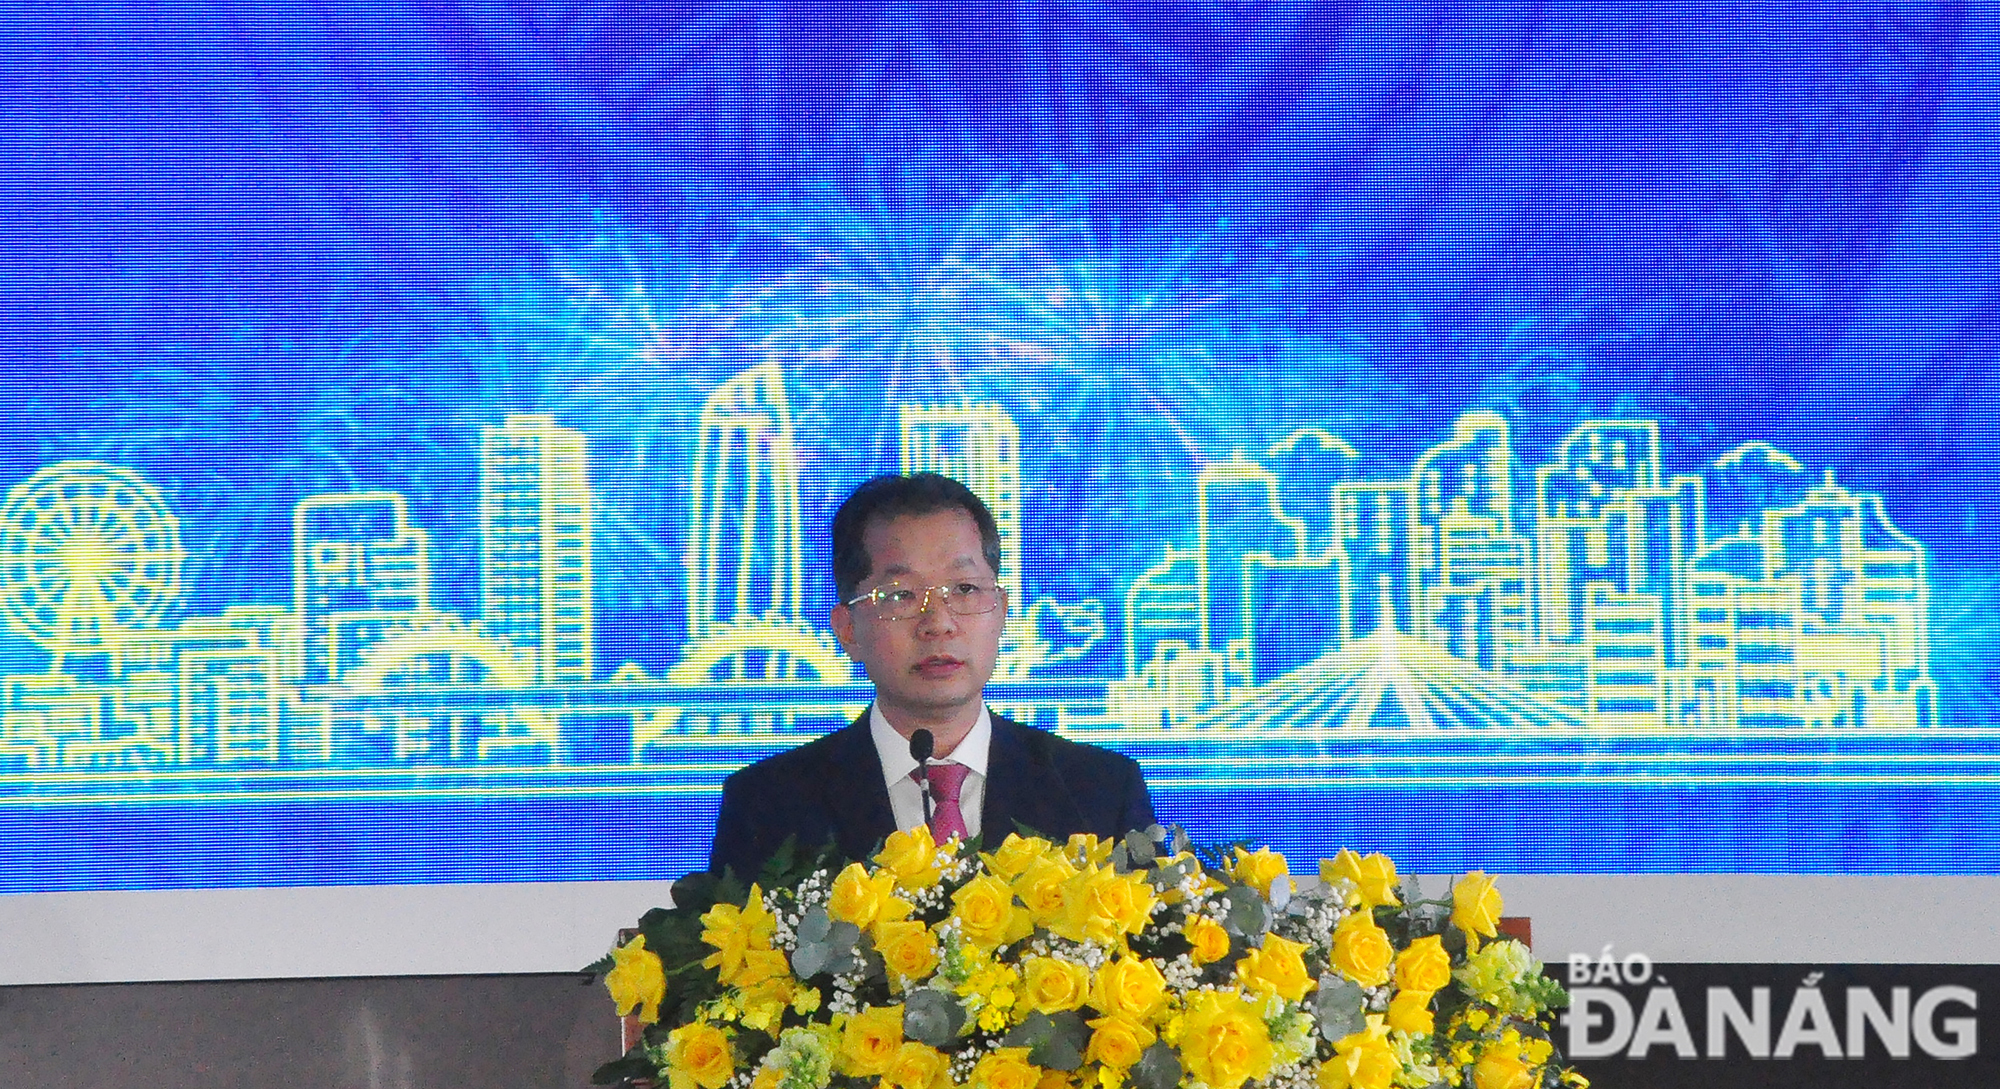 Da Nang Party Secretary Nguyen Van Quang delivers a closing speech at the announcement ceremony of the Da Nang Master Plan for the 2021-2030 period, with a vision toward 2050. Photo: THANH LAN